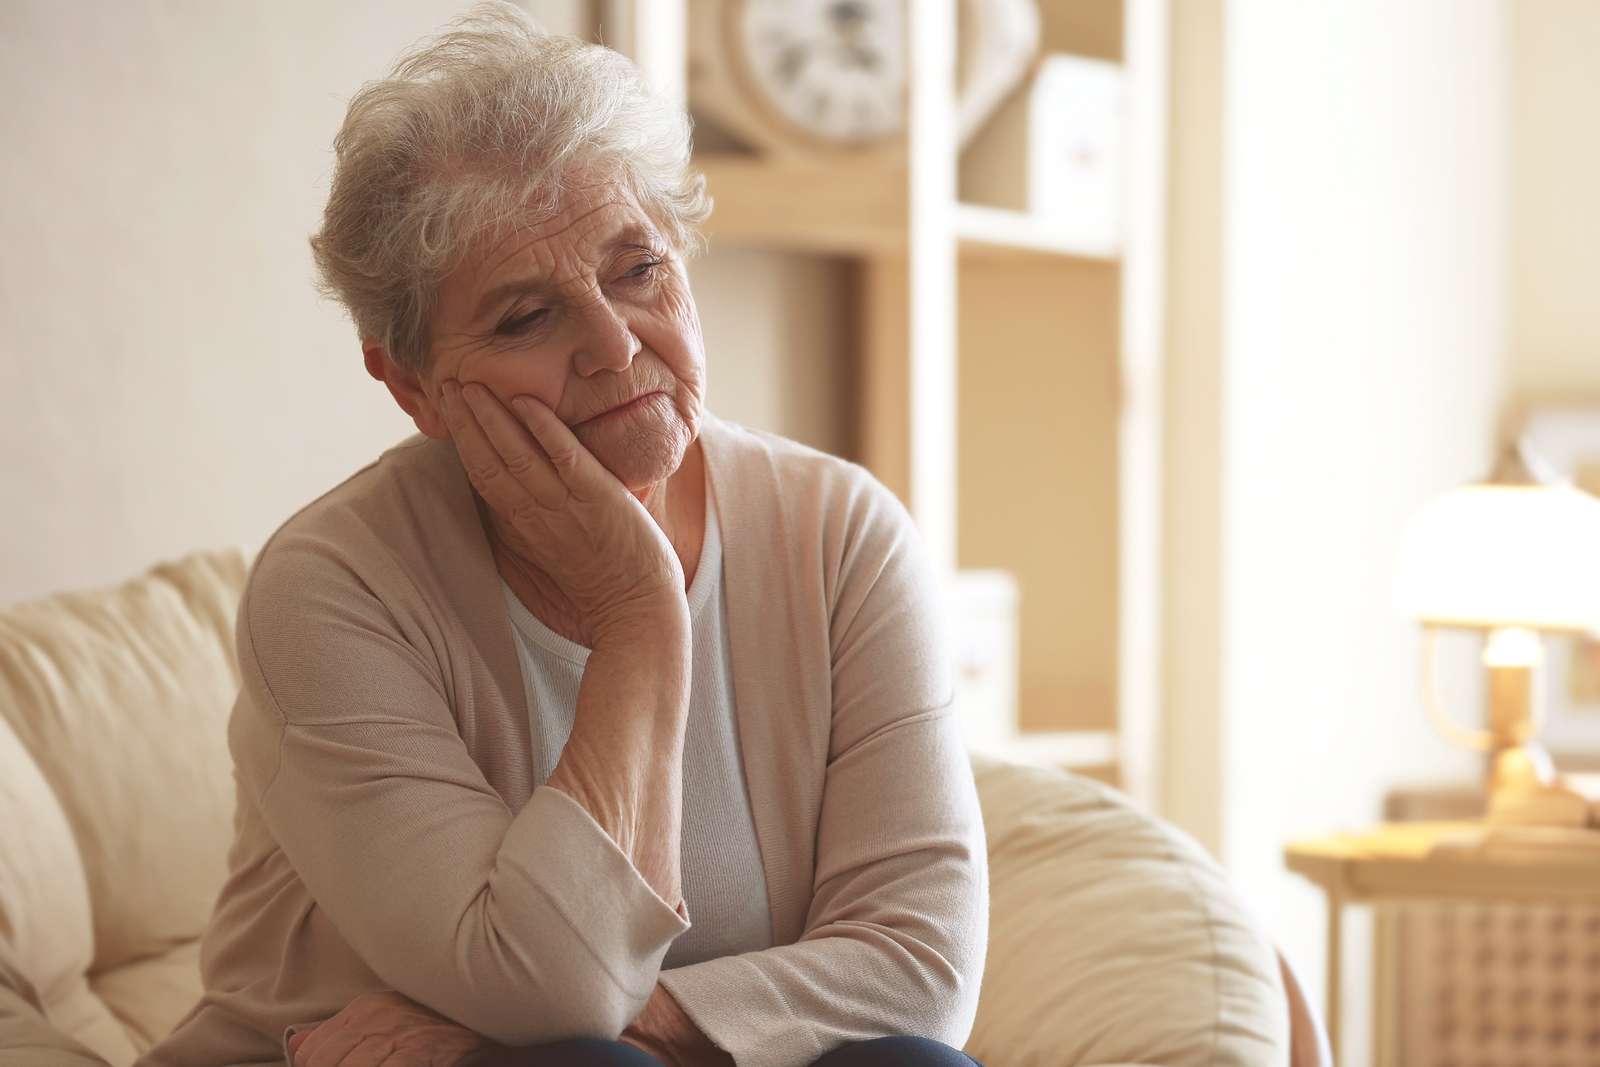 Warning Signs of Depression in Elderly Adults